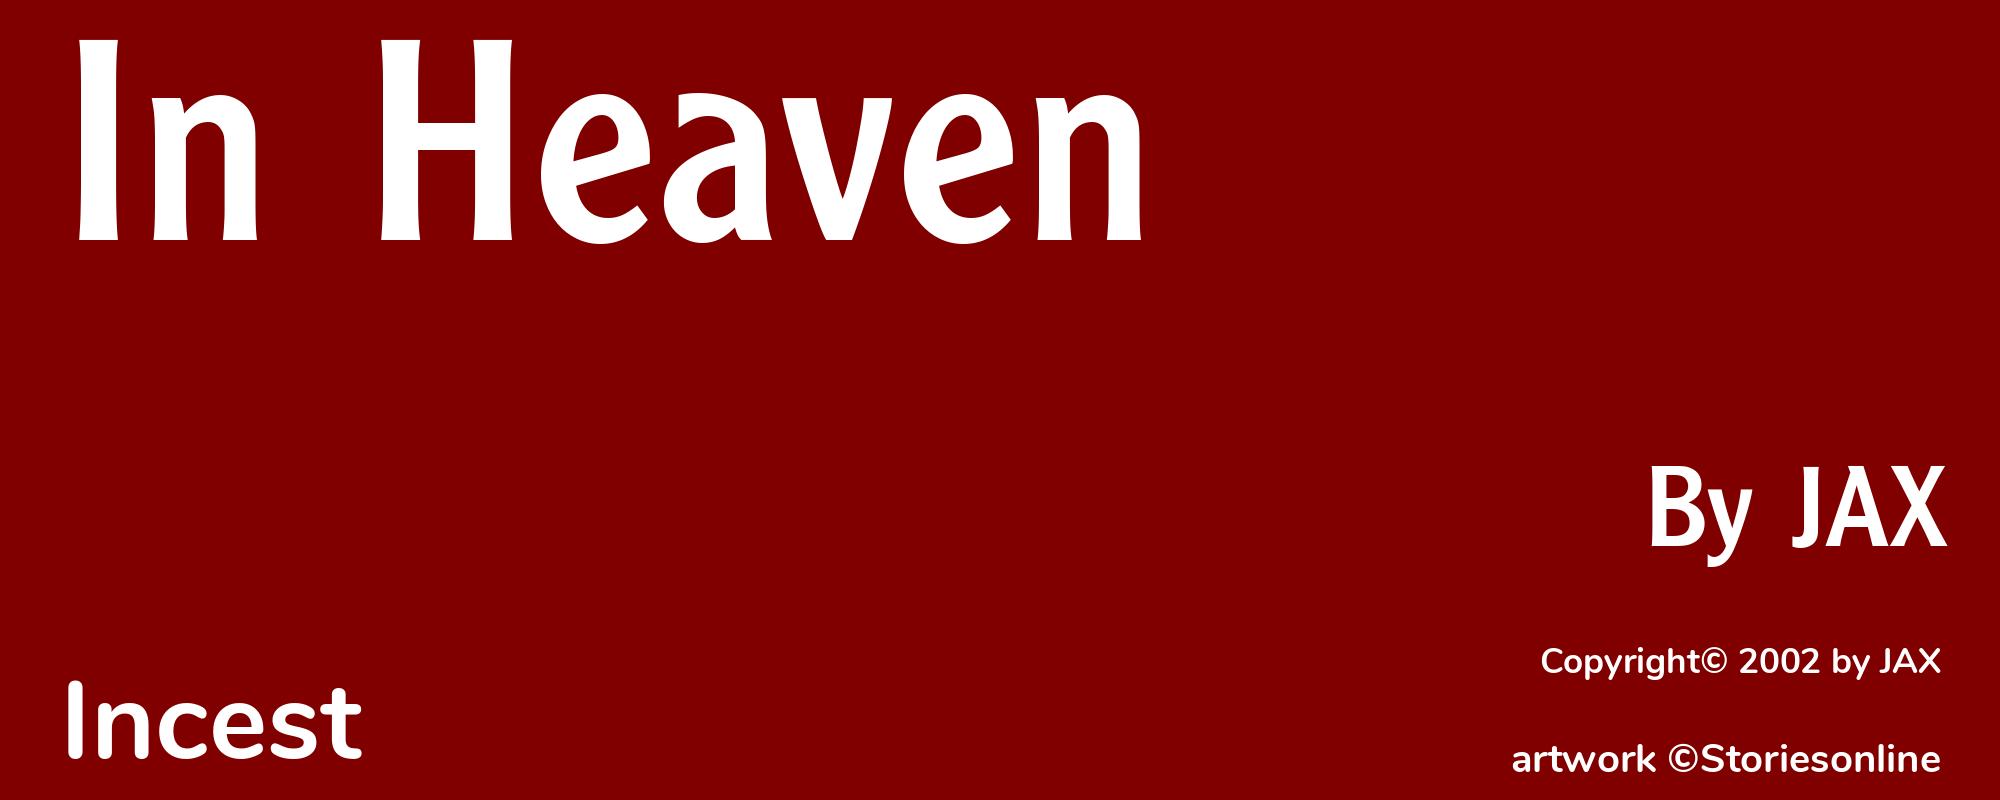 In Heaven - Cover